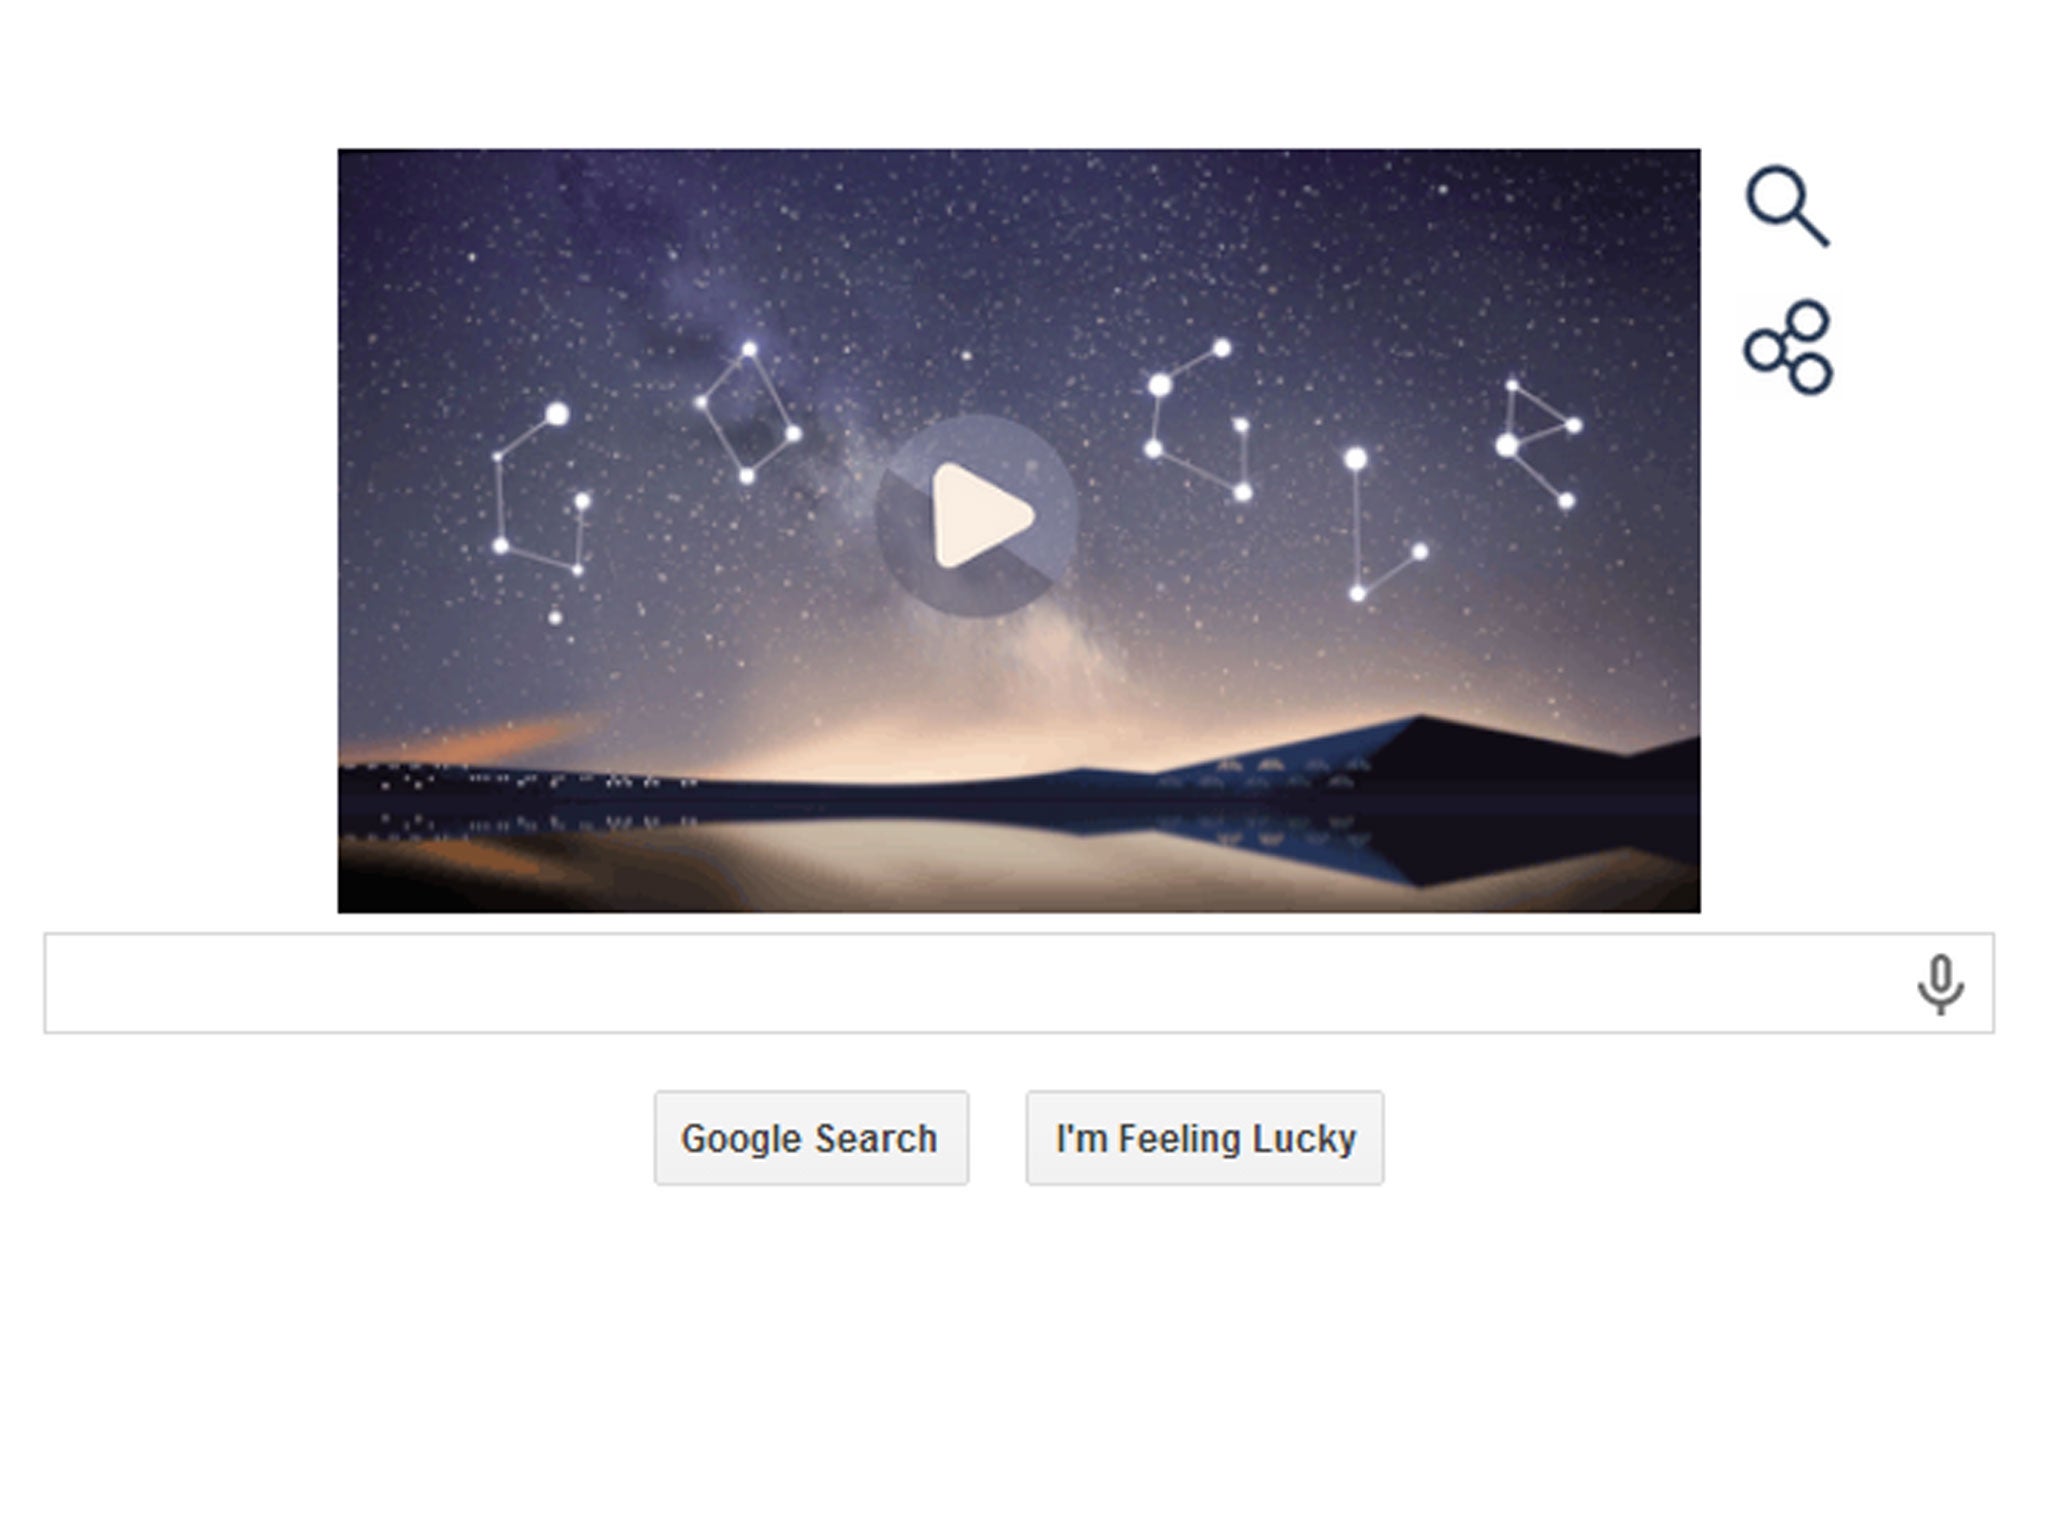 The Google Doodle marking the Perseid Meteor Shower